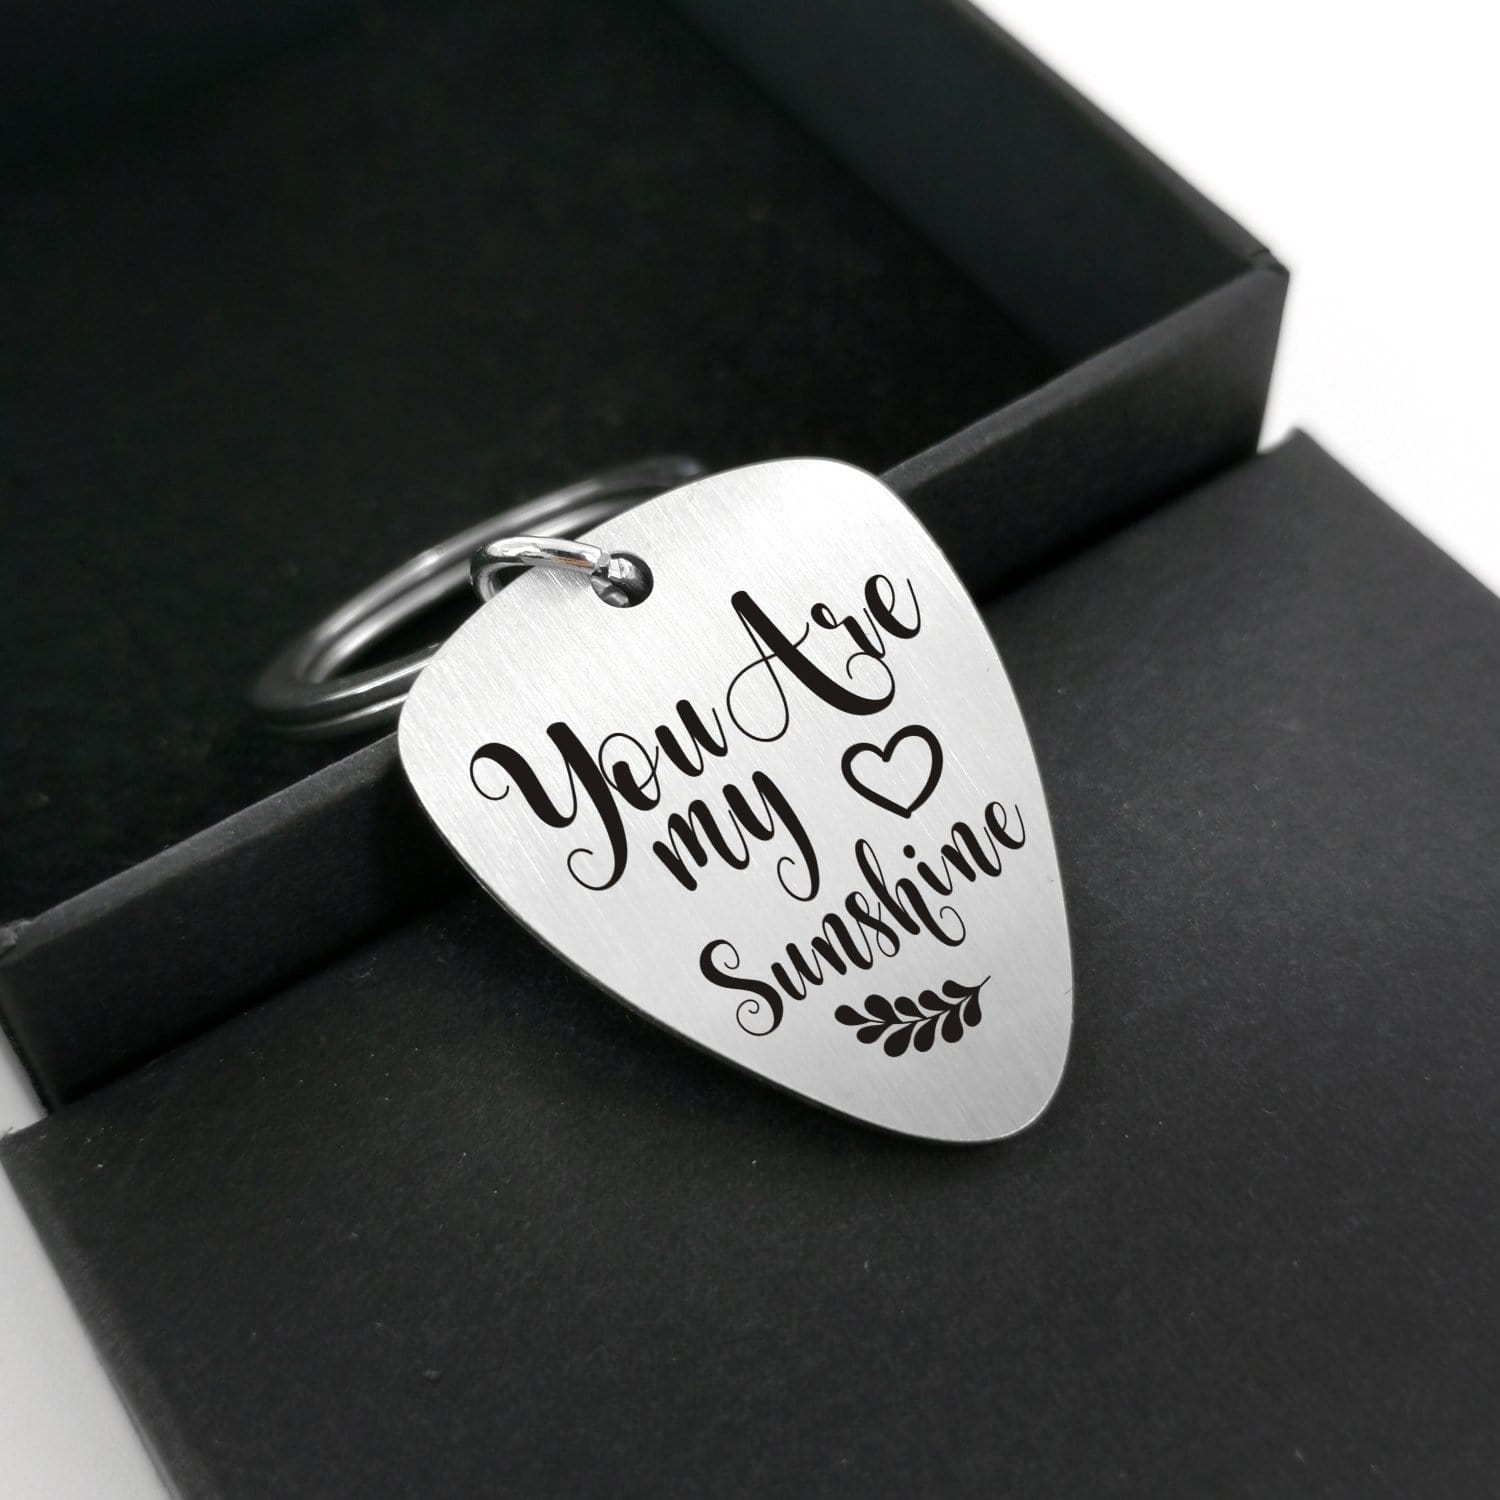 Guitar Pick Keychains You Are My Sunshine - Customized Guitar Pick Keychain GiveMe-Gifts